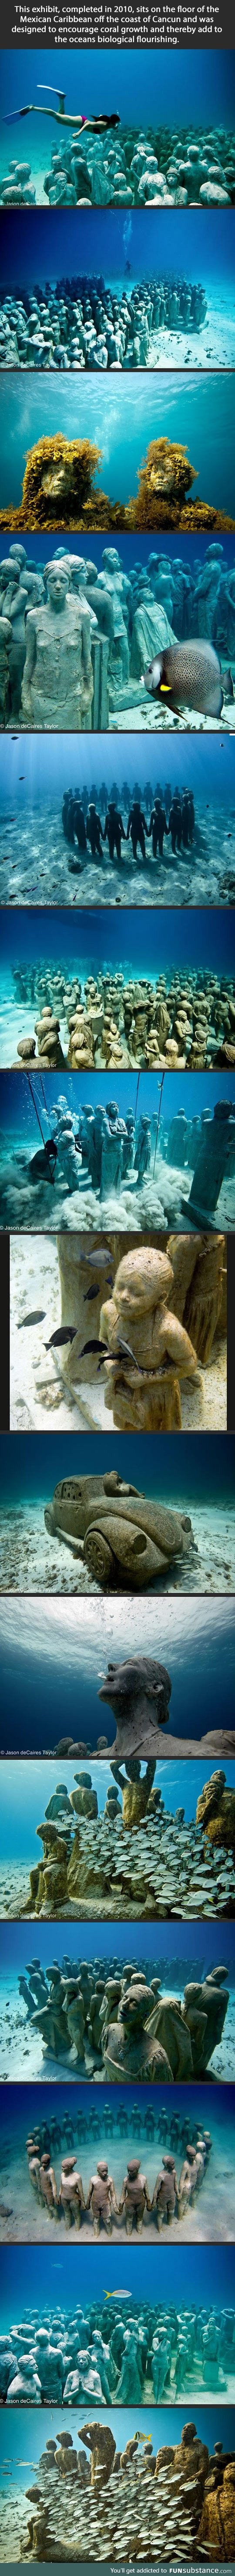 Awesome underwater museum